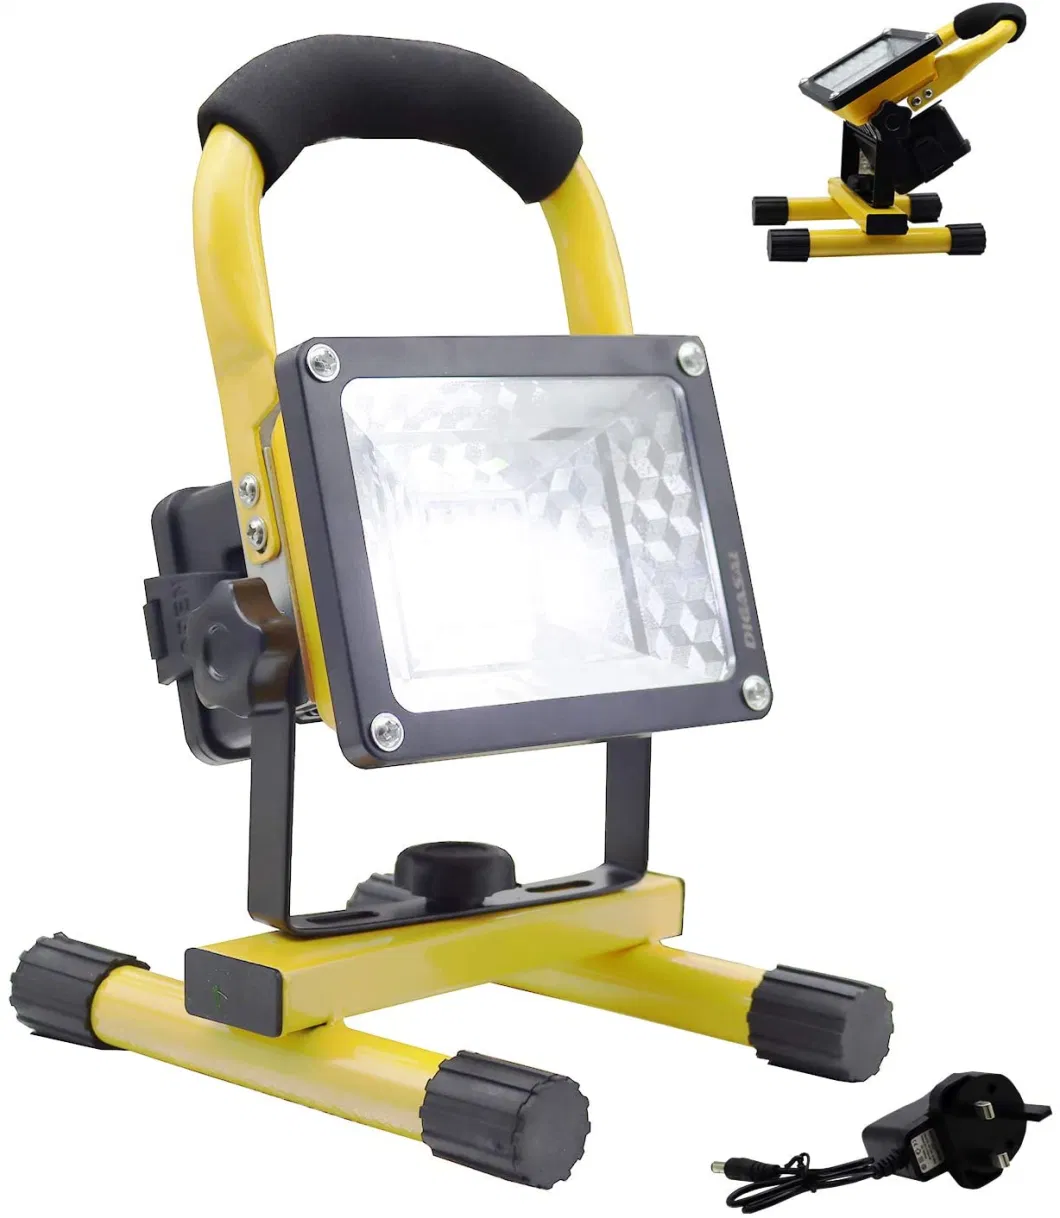 LED Work Lights Rechargeable, LED Floodlight Emergency Work Job Site Lights Waterproof Portable Floodlight for Outdoor Activities, Construction, Camping